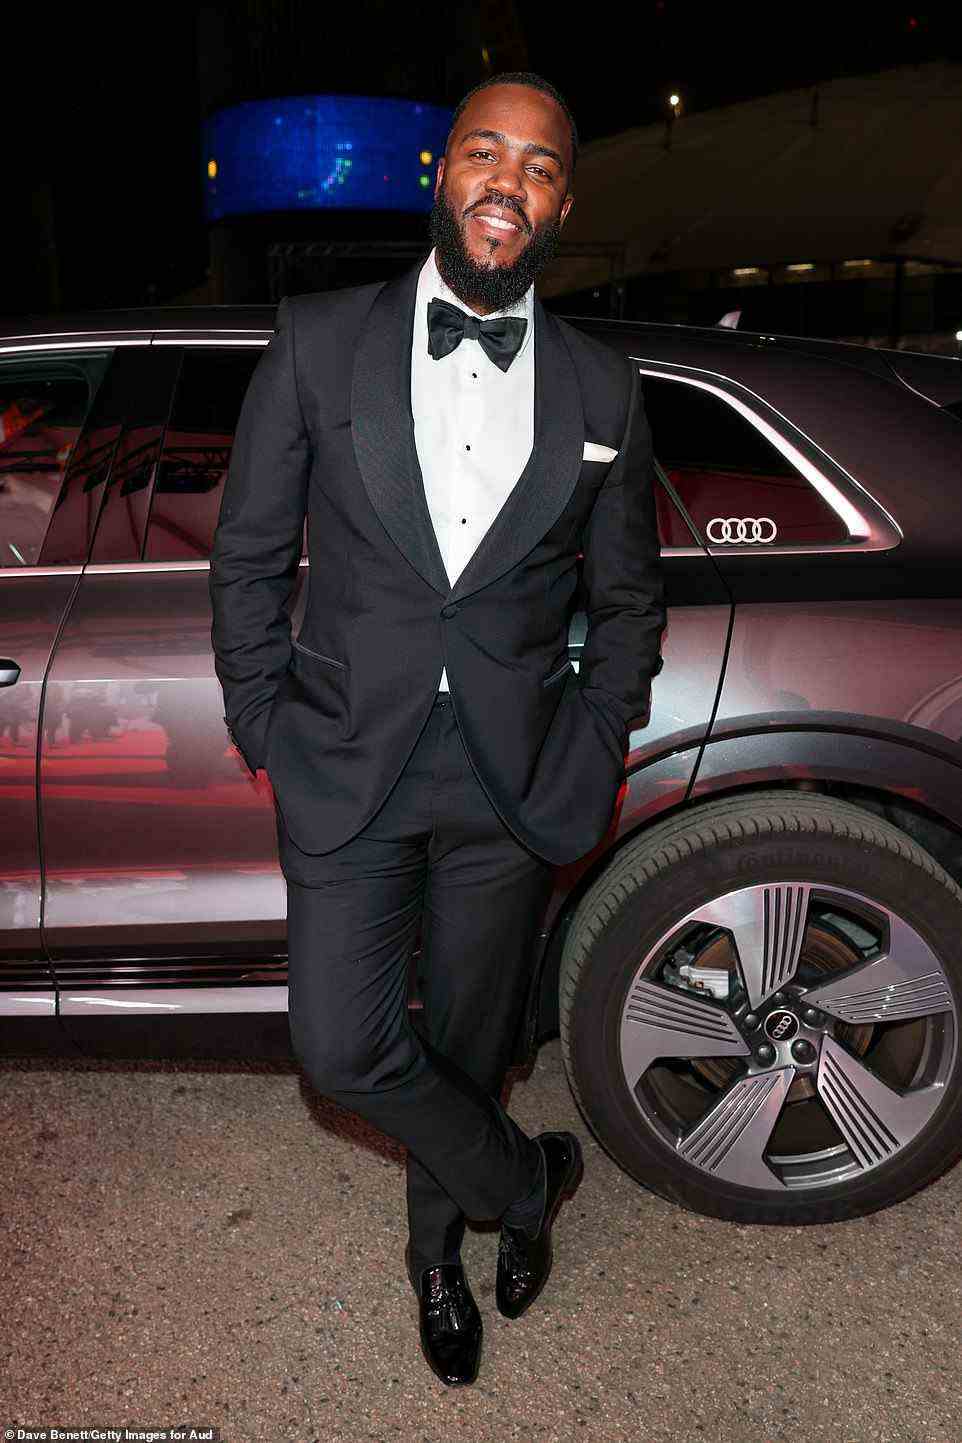 Looking handsome! Host Mo Gilligan looked suave in a black and white suit and wore a bow tie